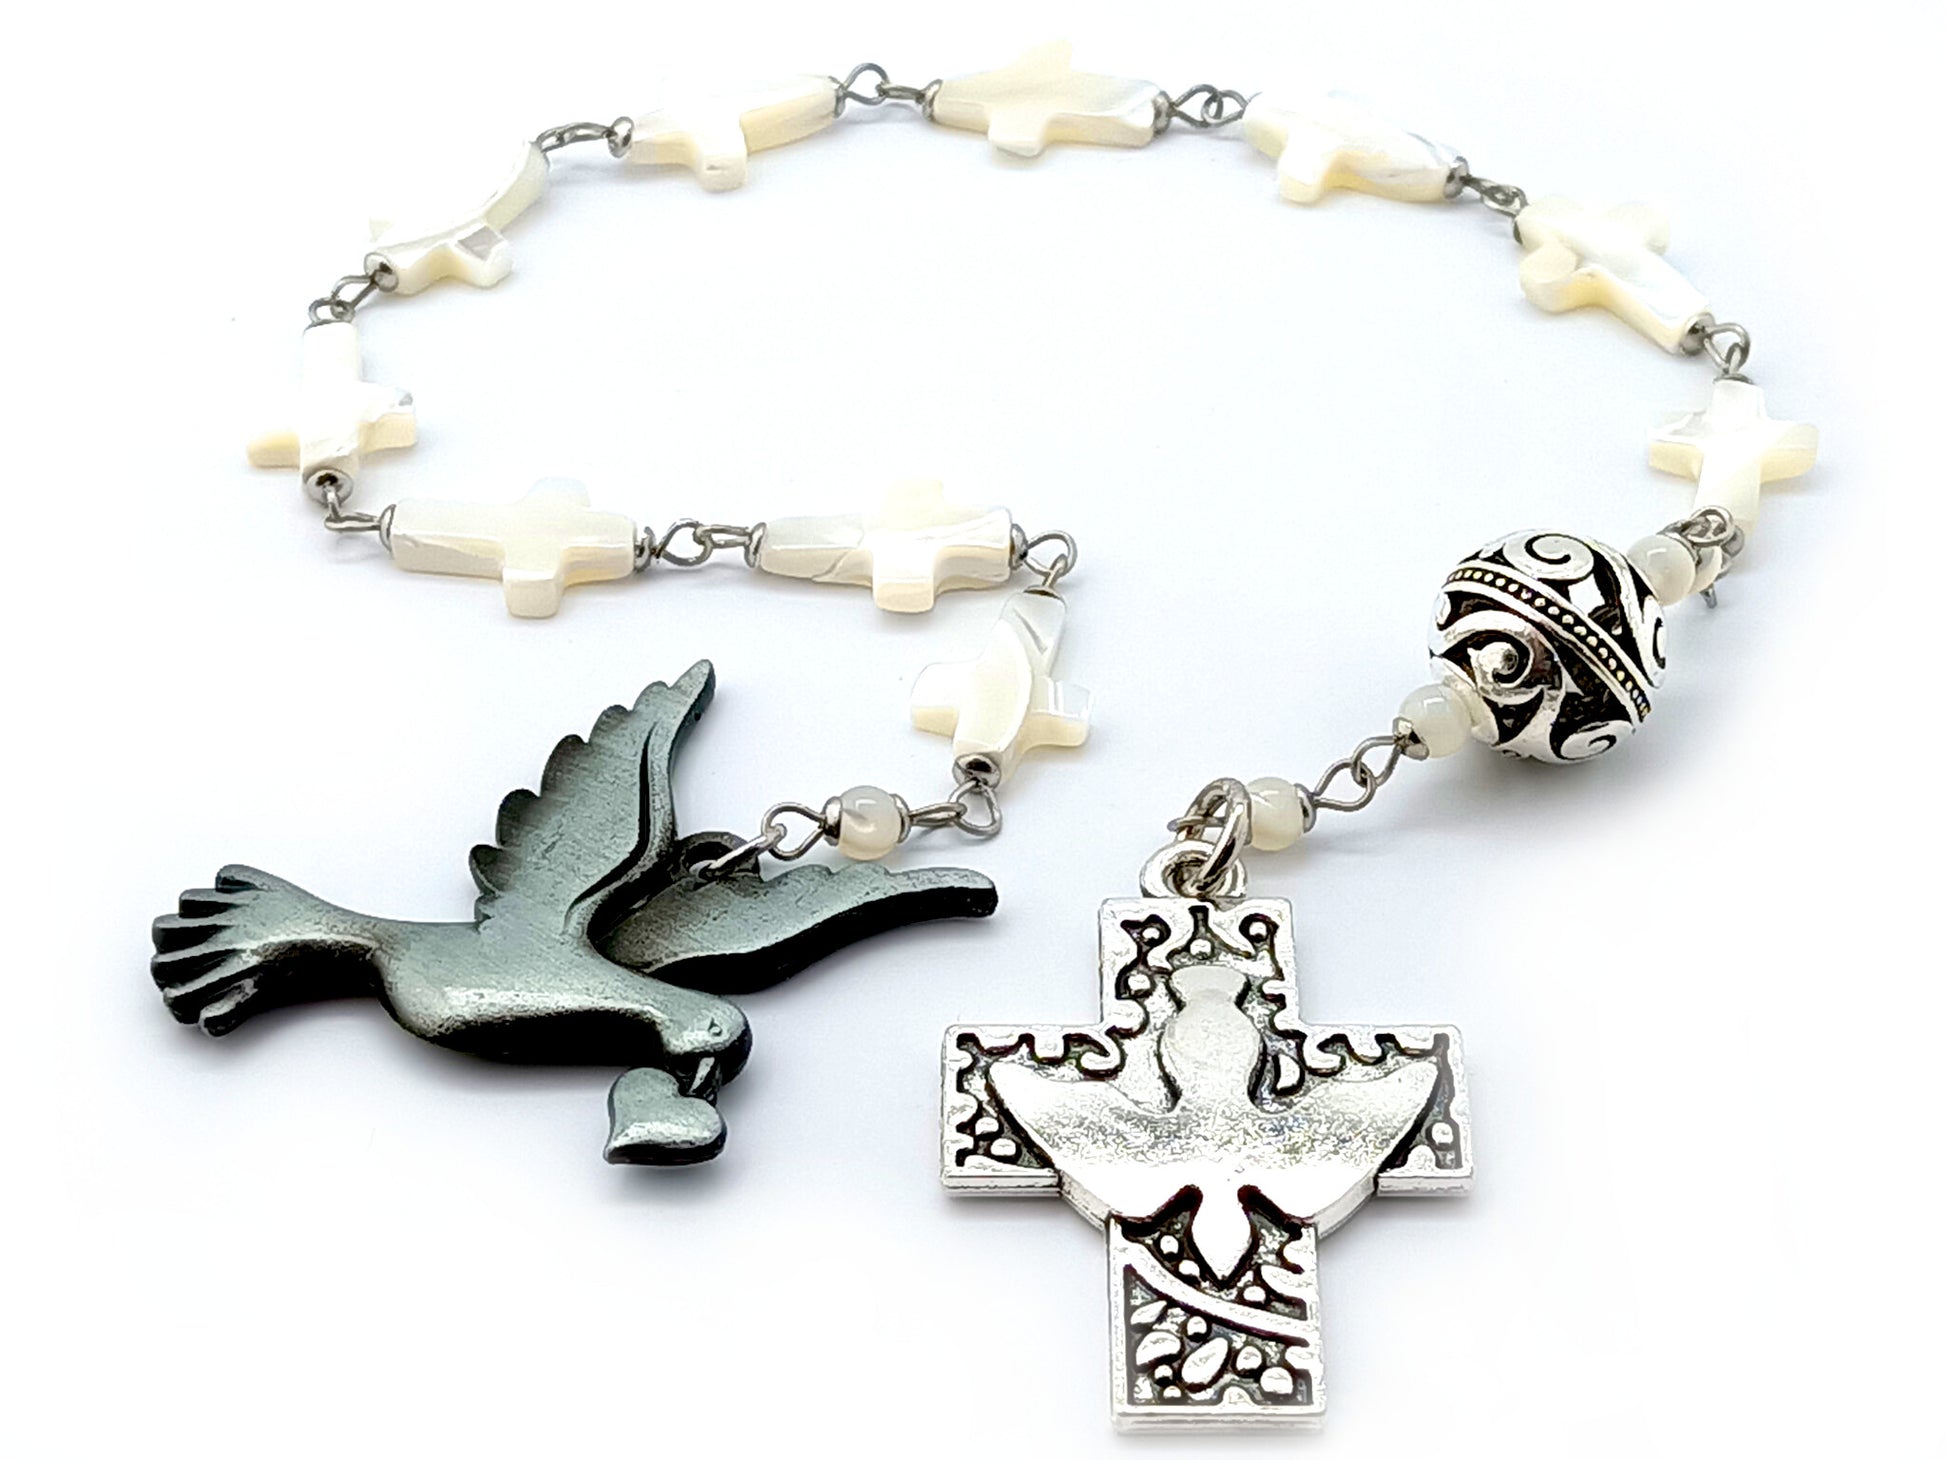 Holy Spirit mother of pearl single decade rosary beads with large